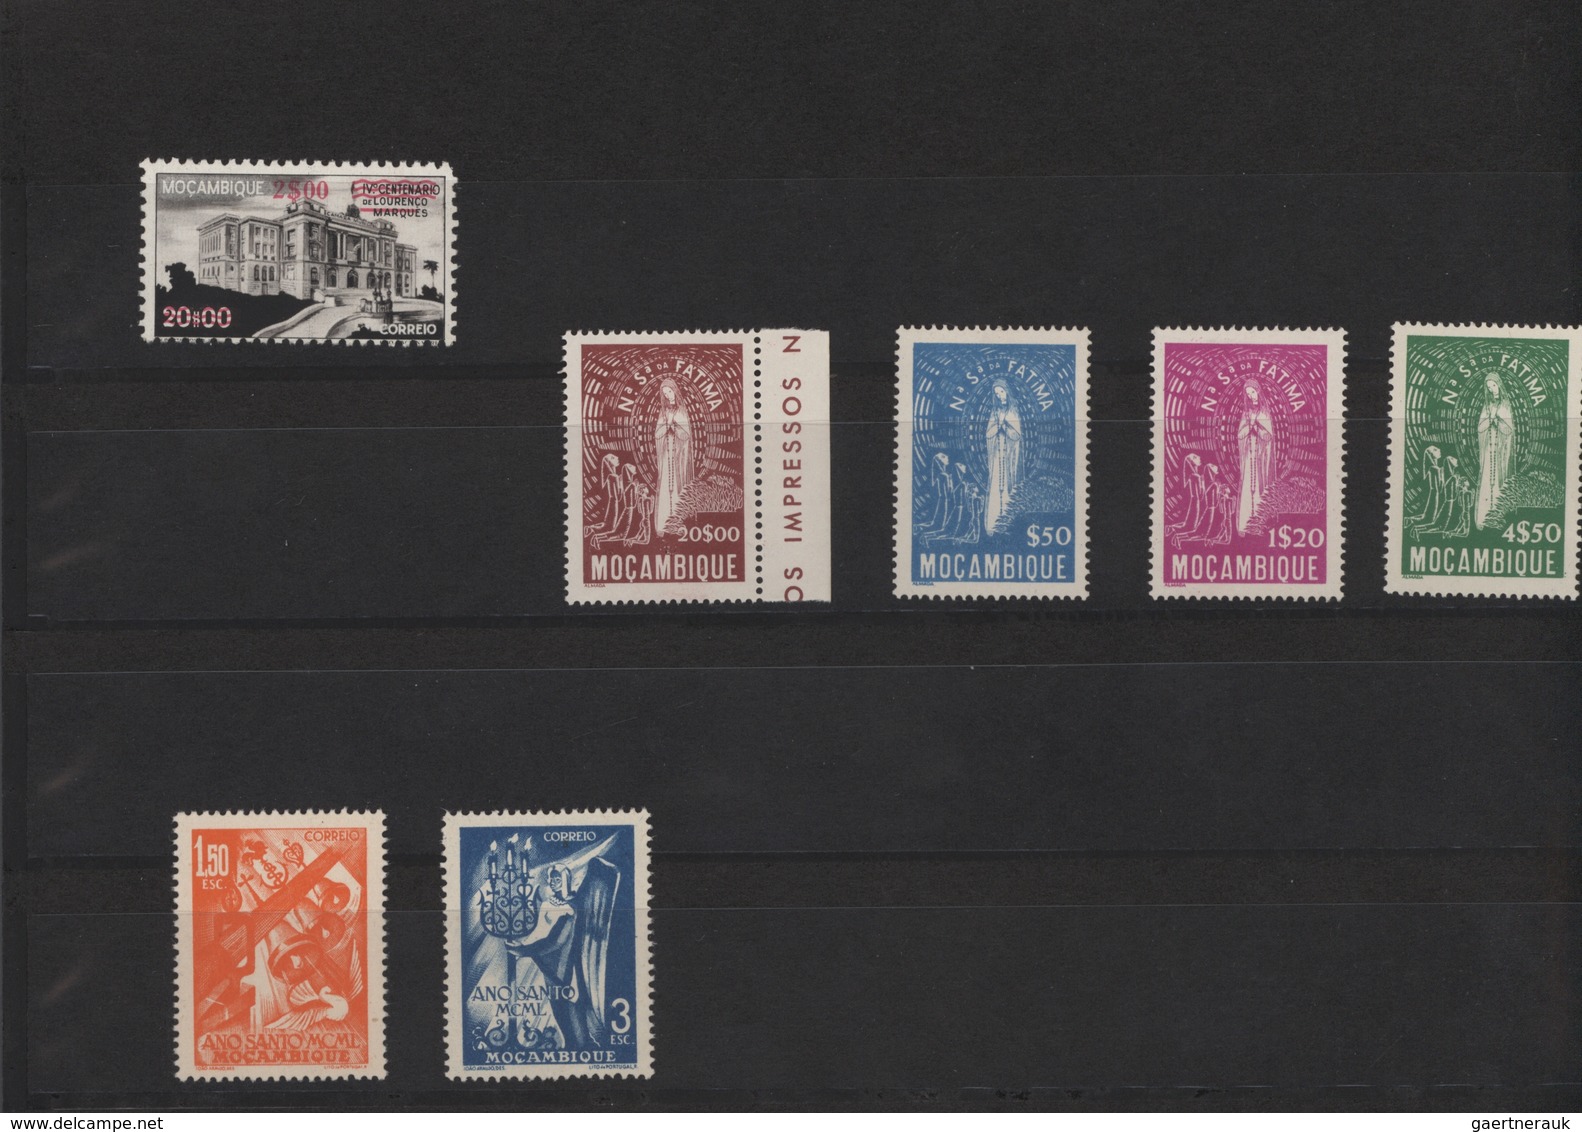 Kap Verde: 1938/1975, Beautiful Mint Never Hinged Collection Of The Portugues Colonial Stamps From T - Kap Verde